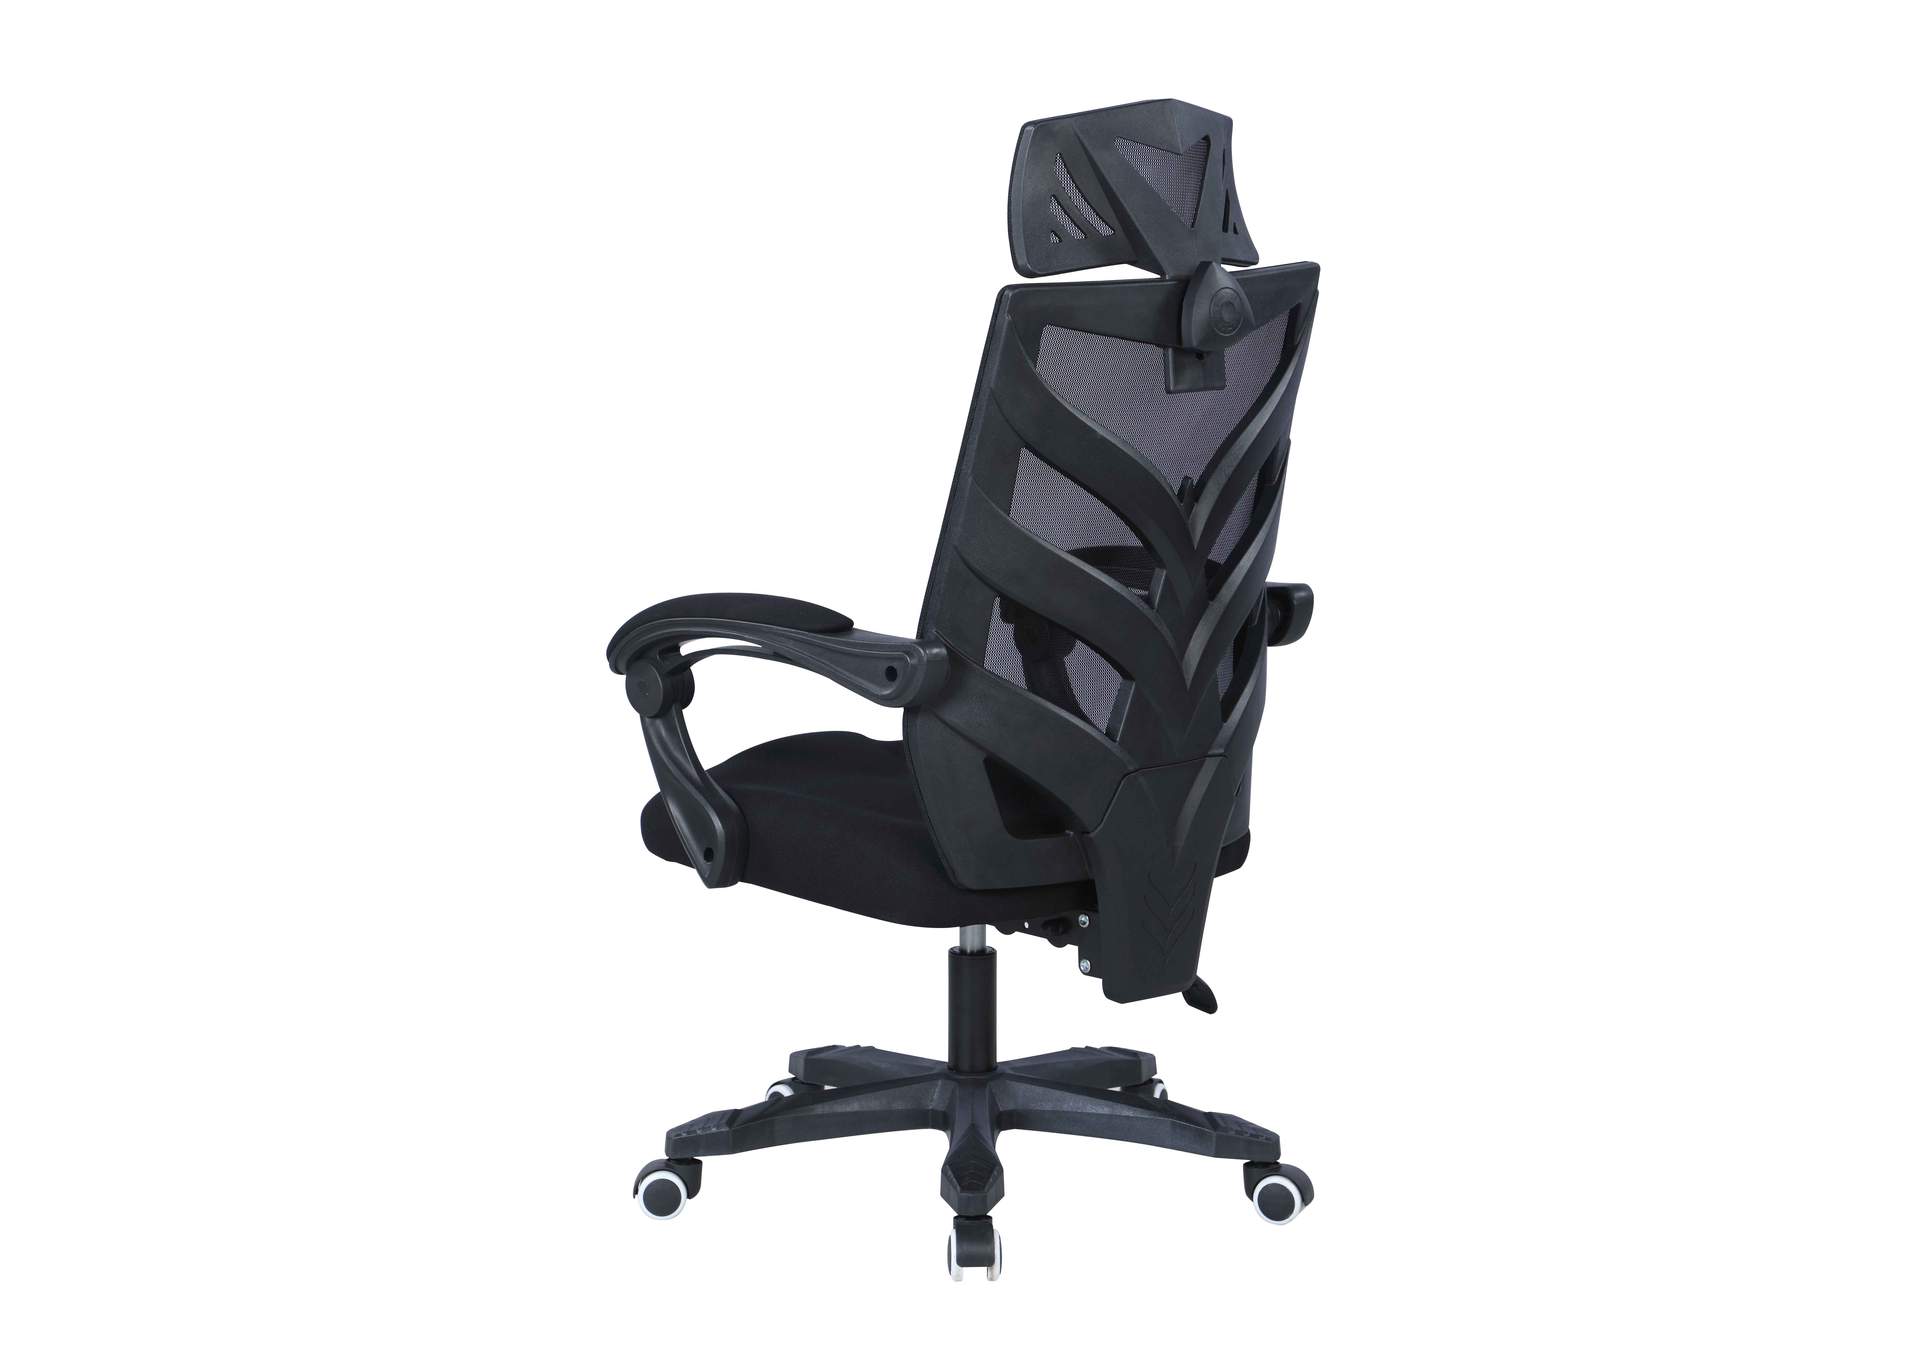 Reclining Computer Chair With Headrest & Padded Arms,Chintaly Imports